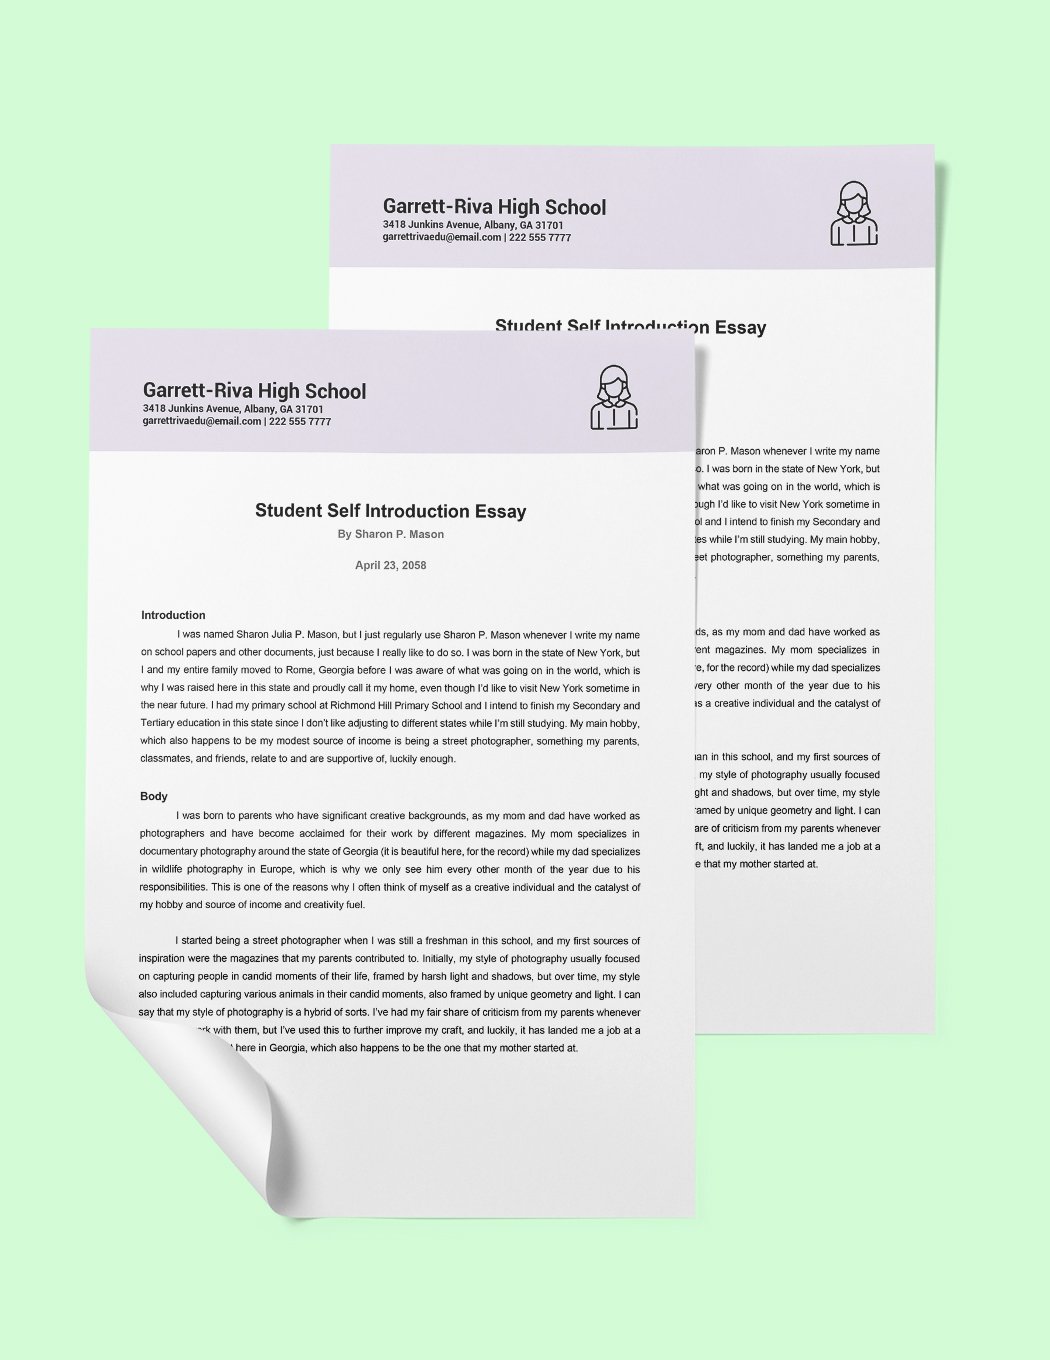 Student Self Introduction Essay Template